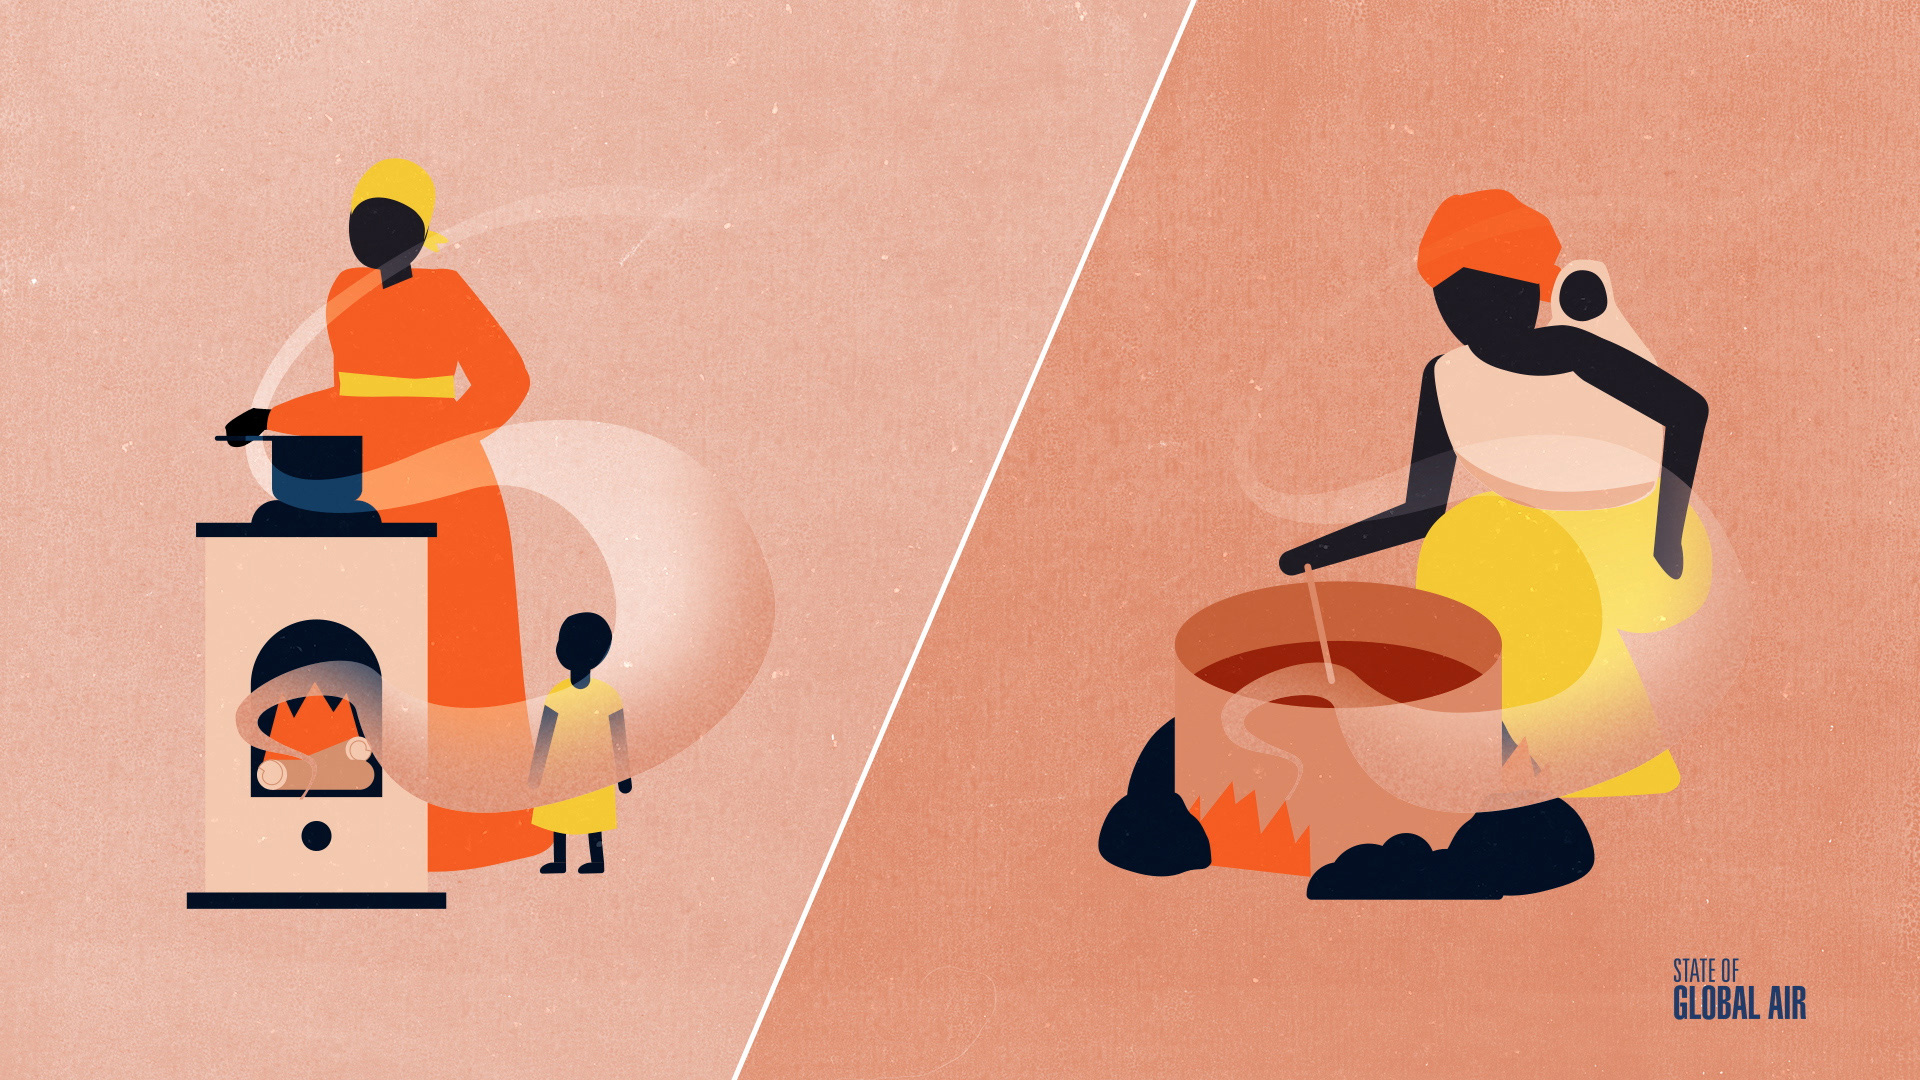 Illustration of two women with young children cooking inside a home. Burning is emitting air pollution.